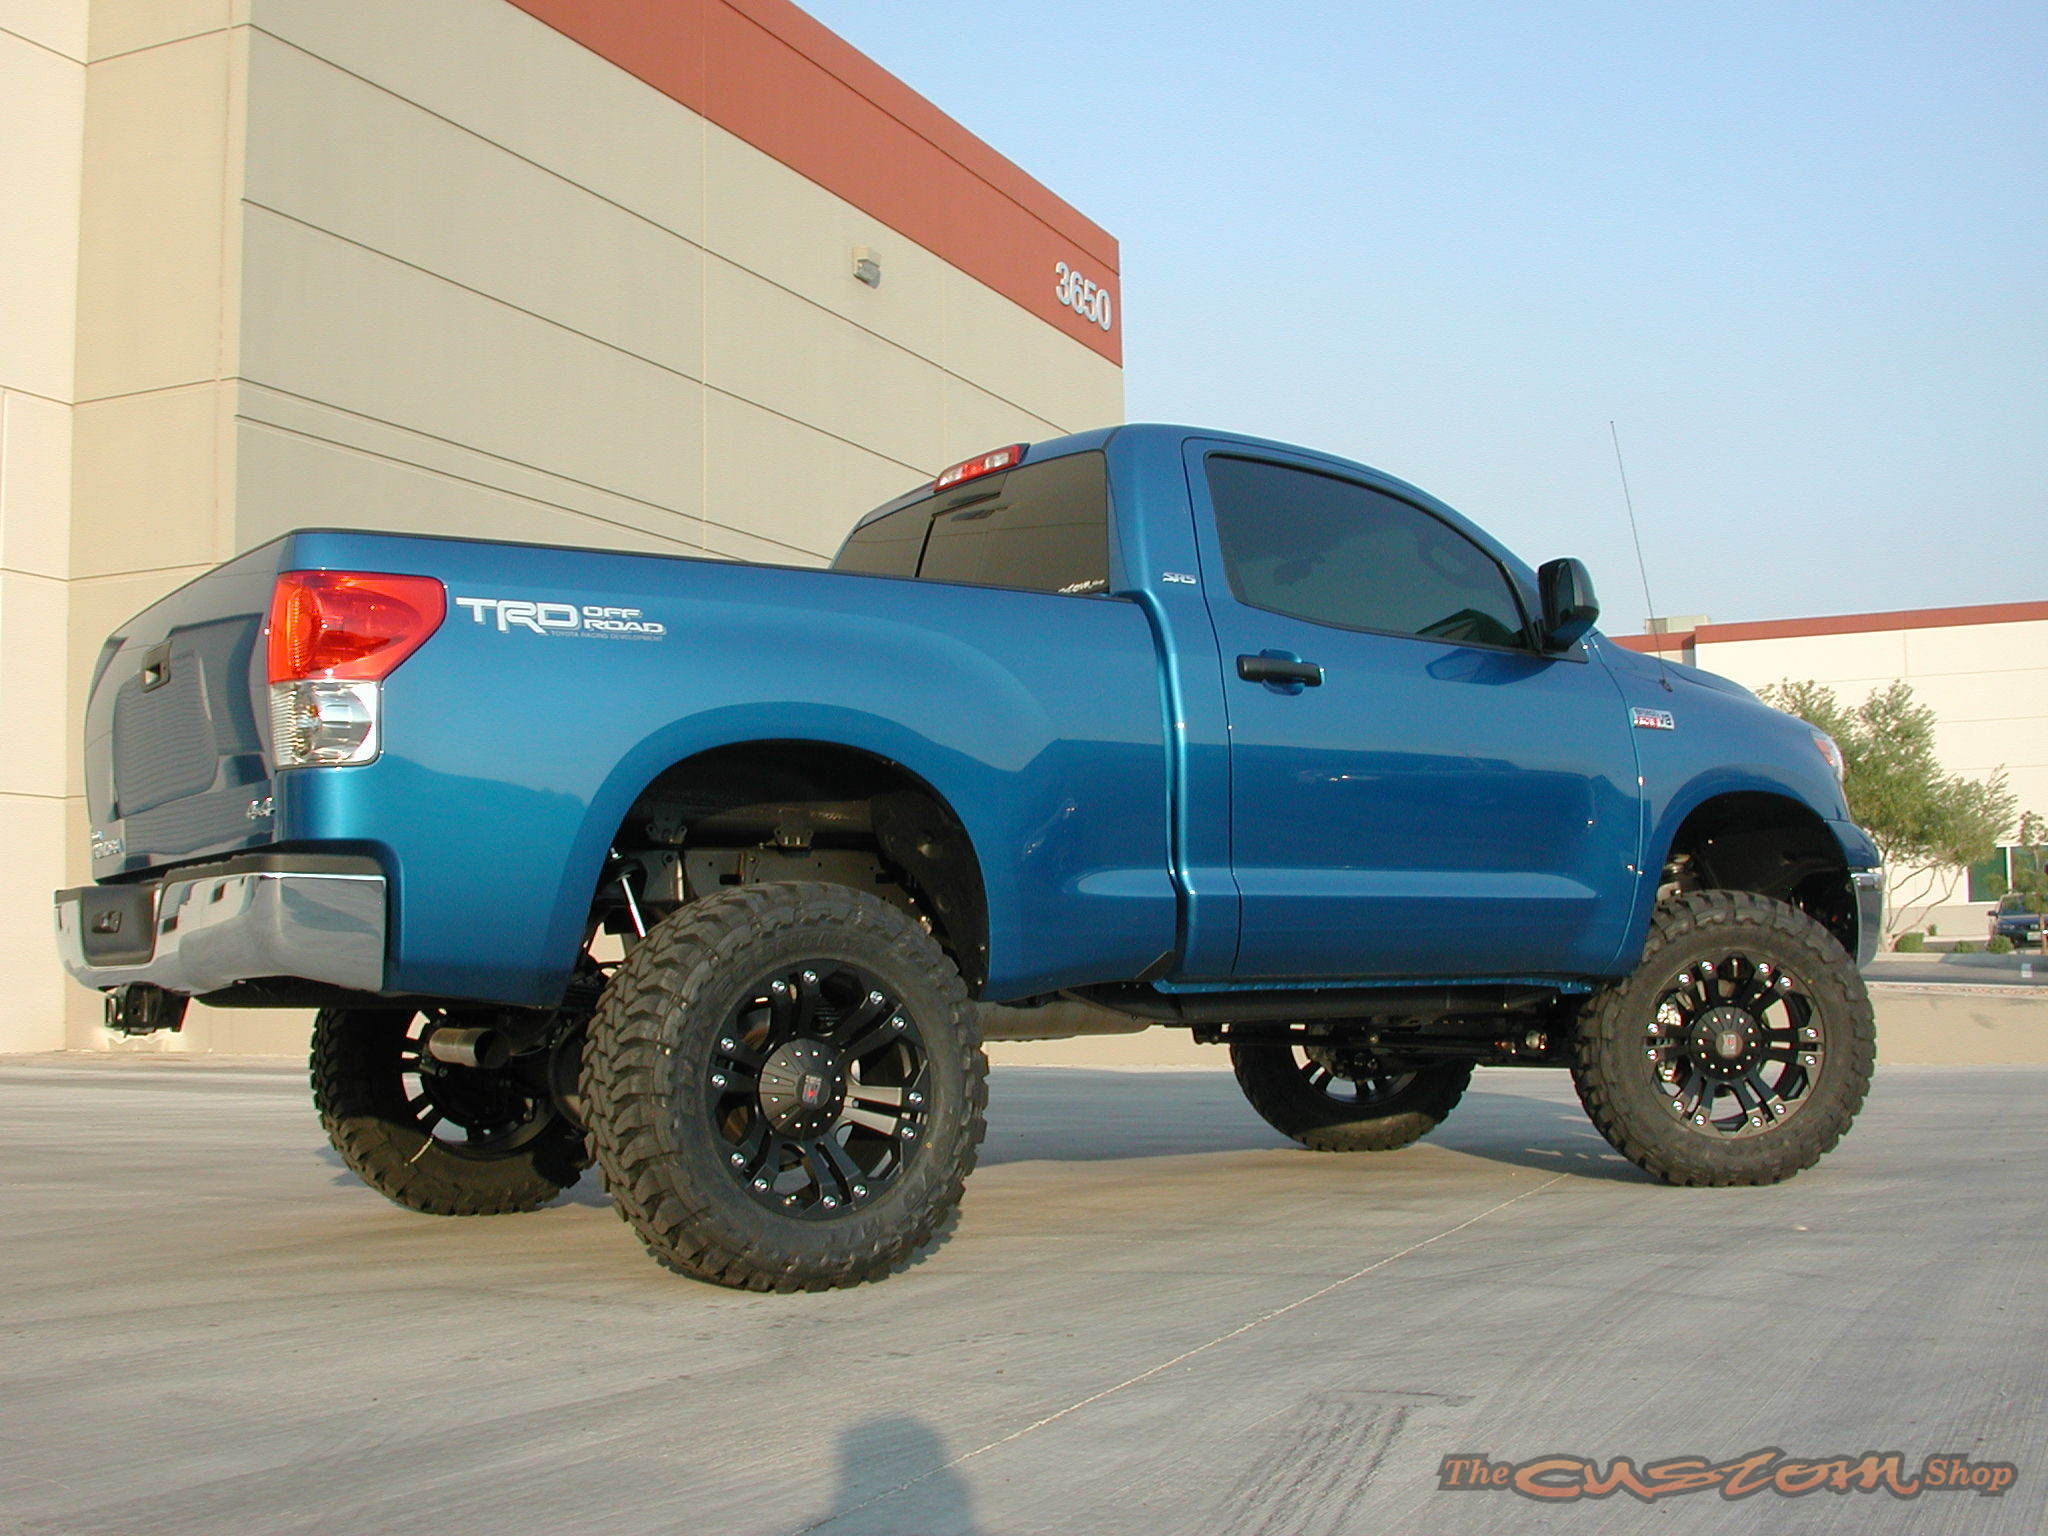 View of Toyota Tundra Regular Cab 4x4. Photos, video, features and